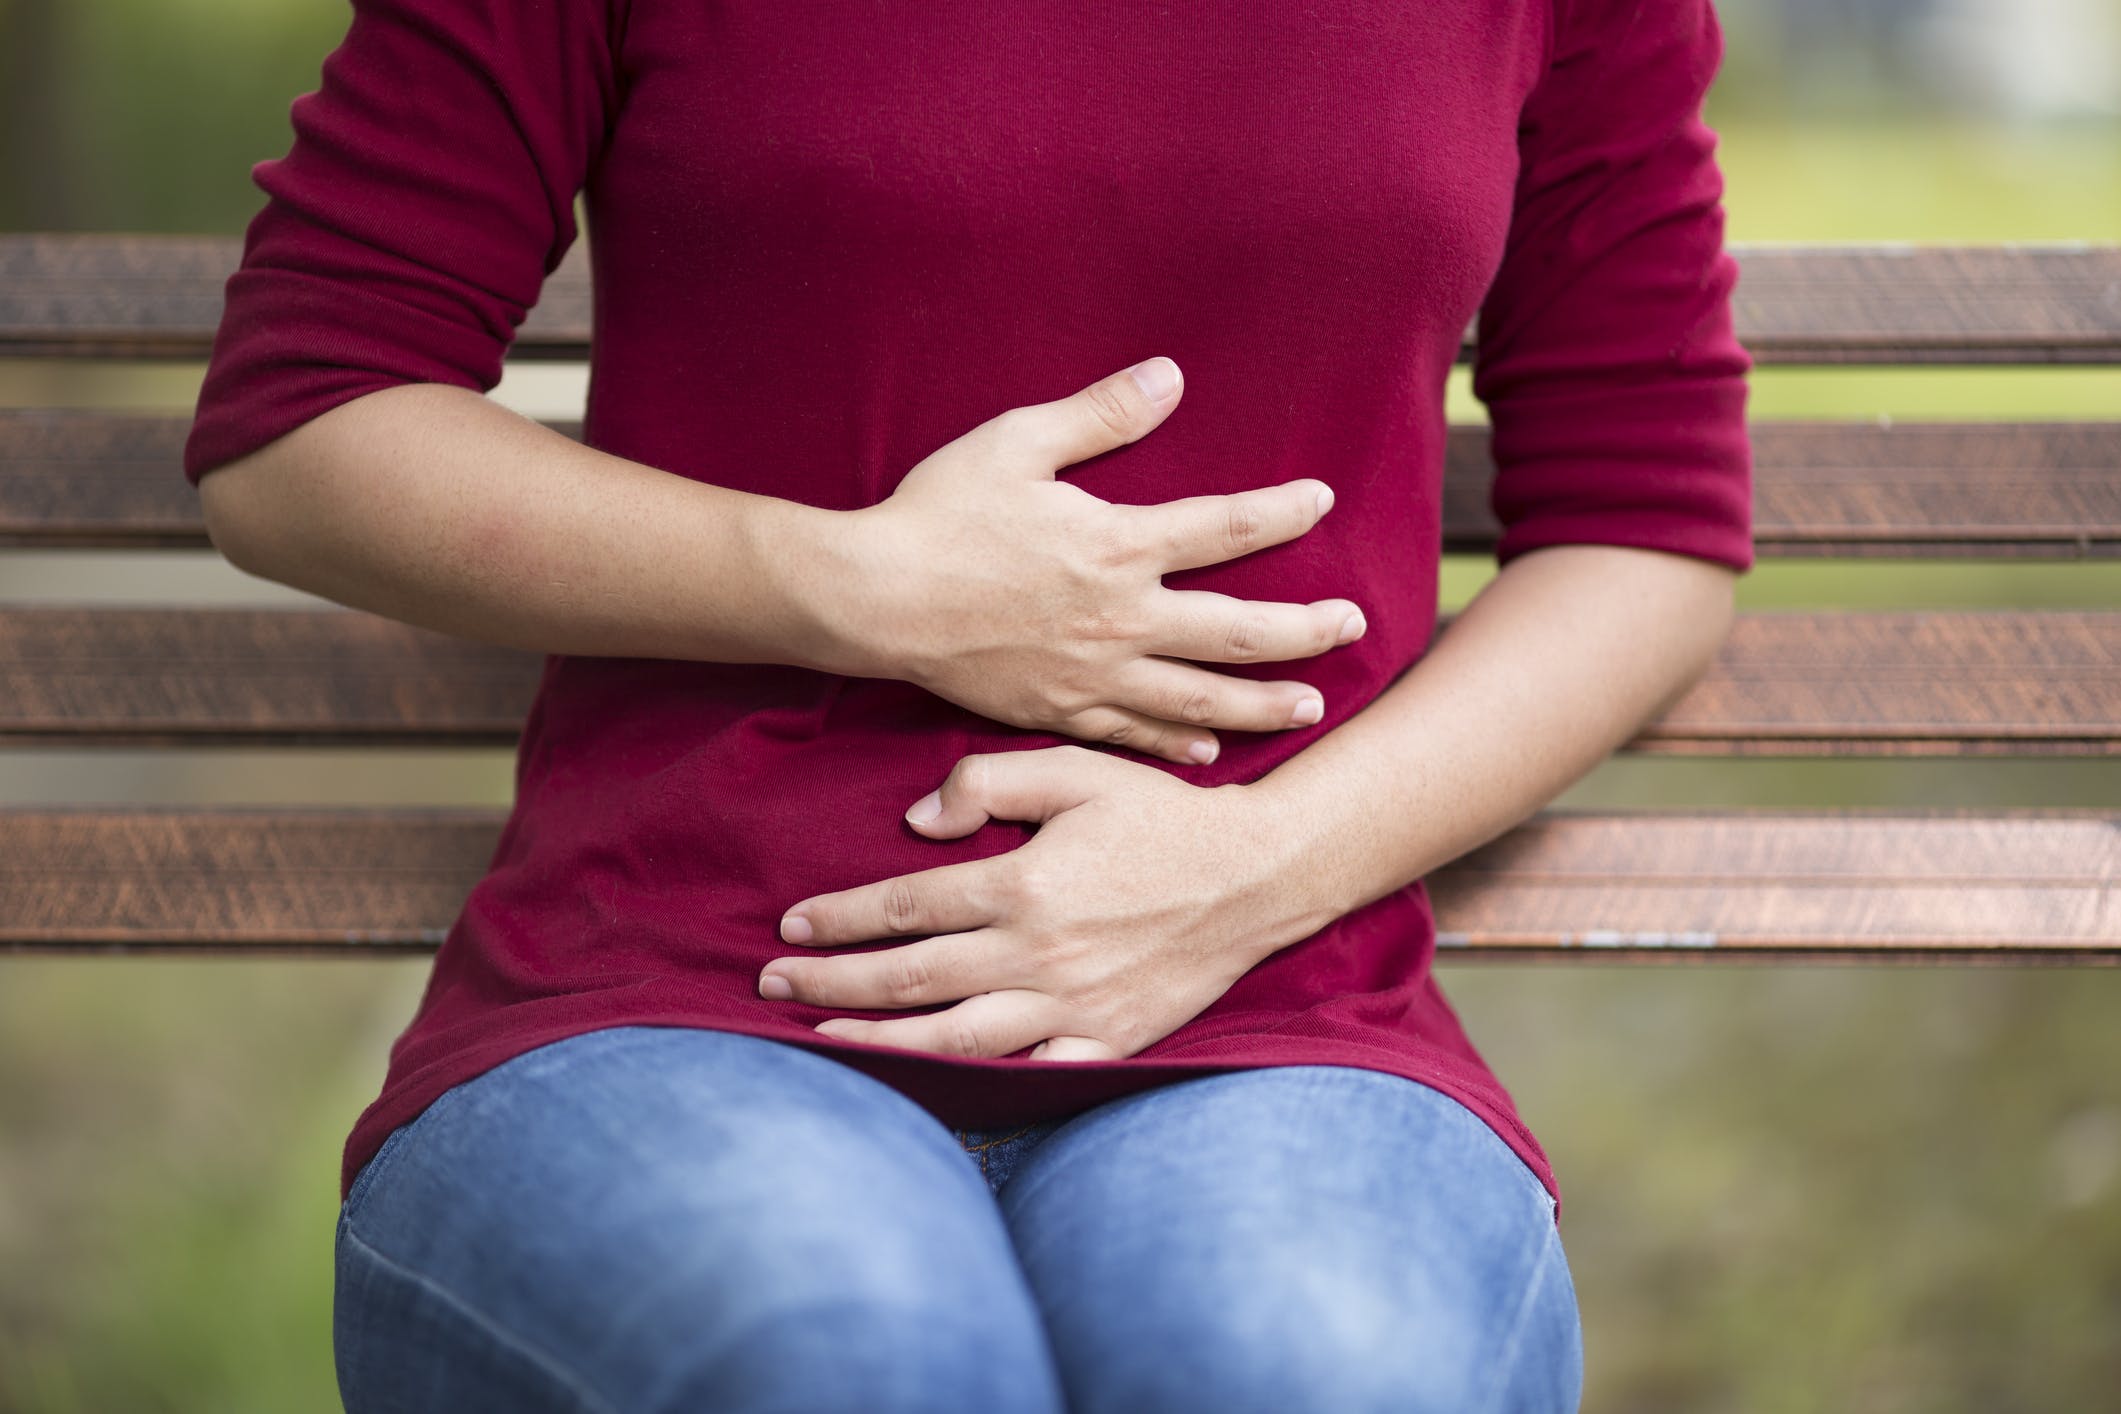 Top 5 Foods That Damage Your Digestion